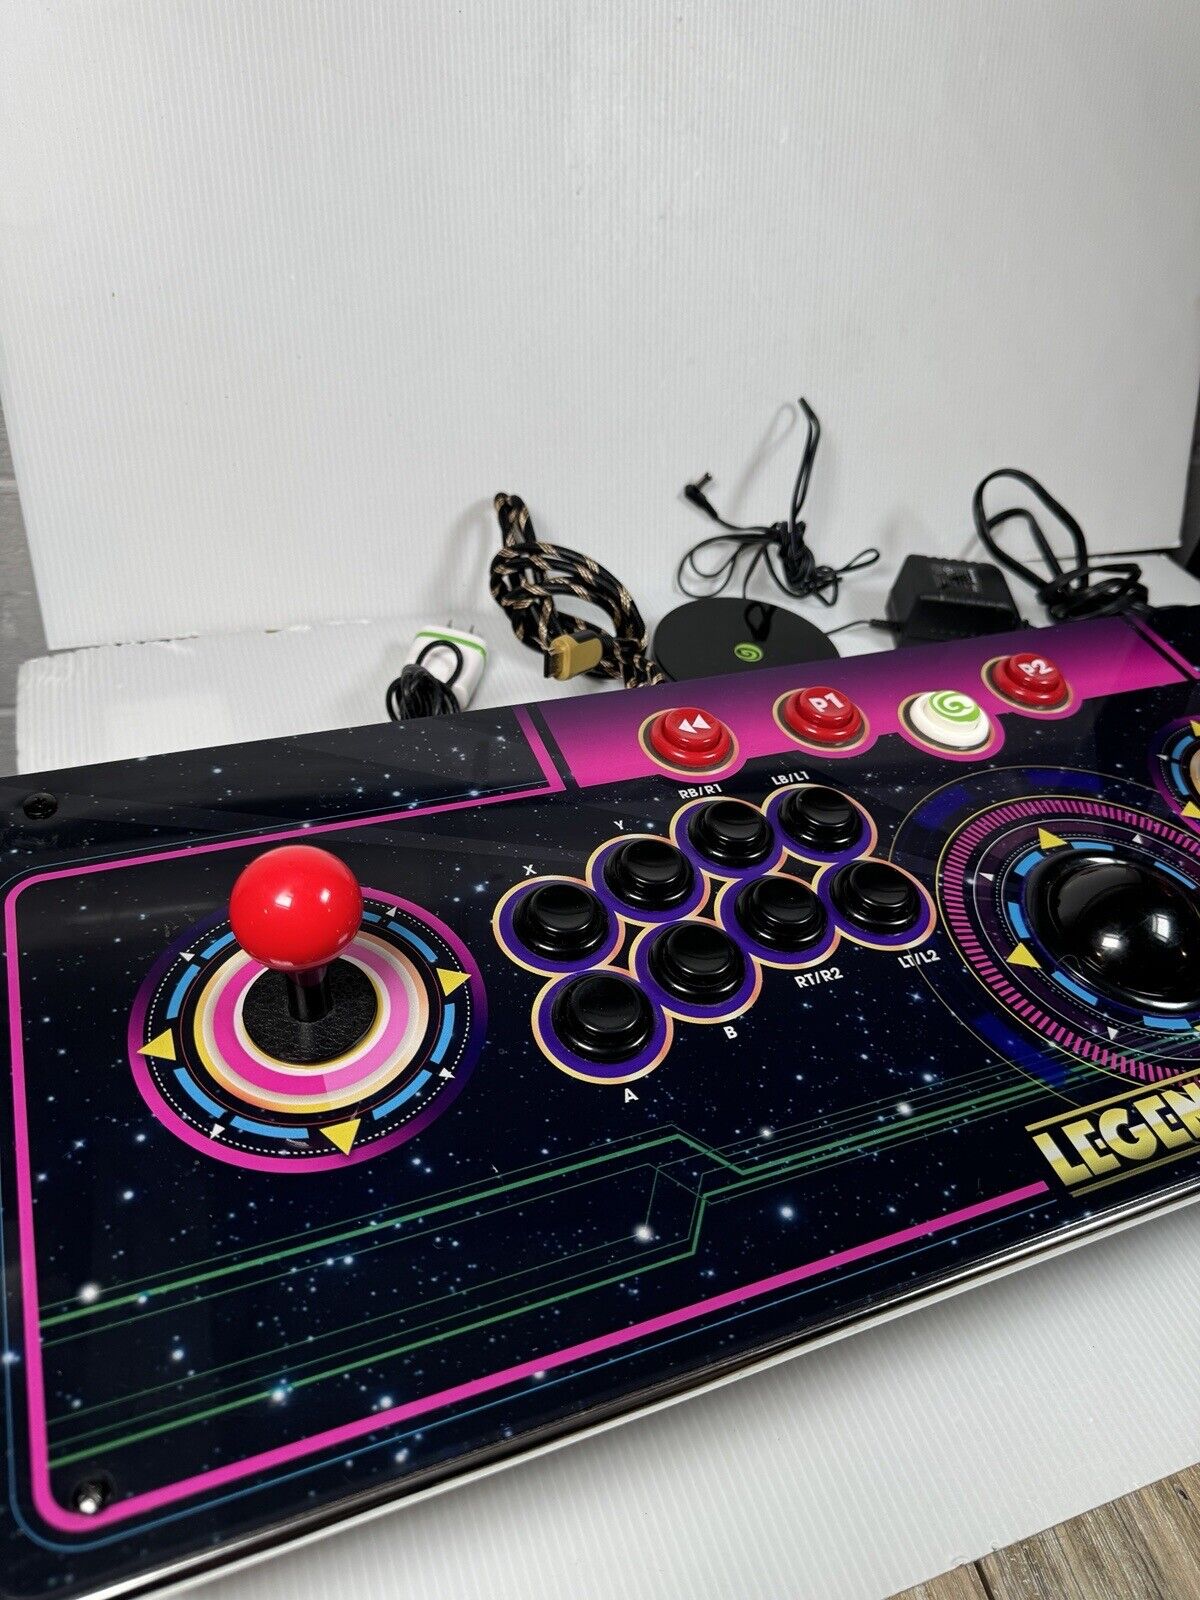 AtGames Legends Gamer Pro HA2802 Home Arcade Wireless Console with Trackball